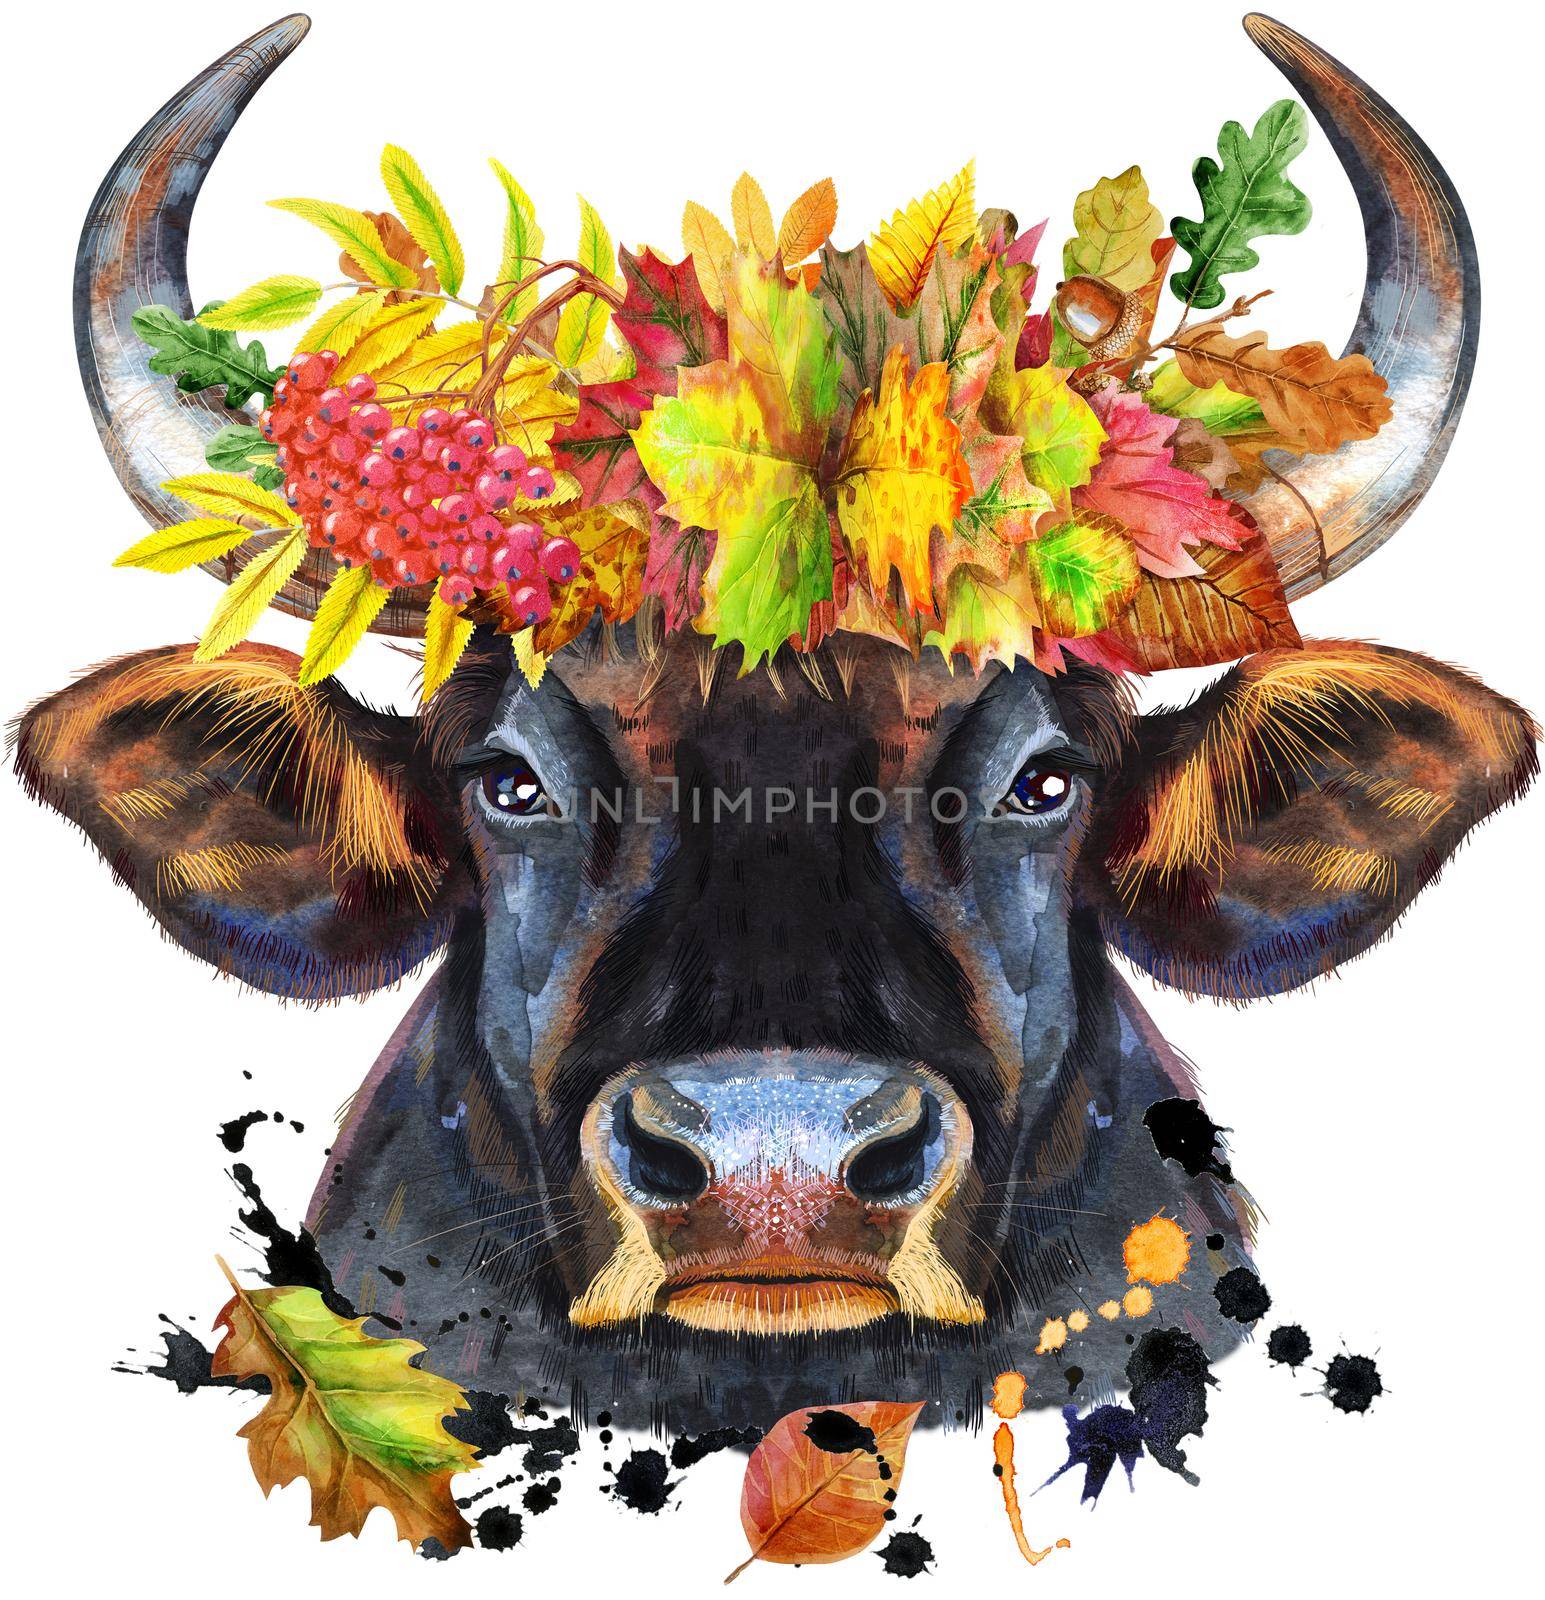 Bull in wreath of autumn leaves. Watercolor graphics. Bull animal illustration with splashes watercolor.